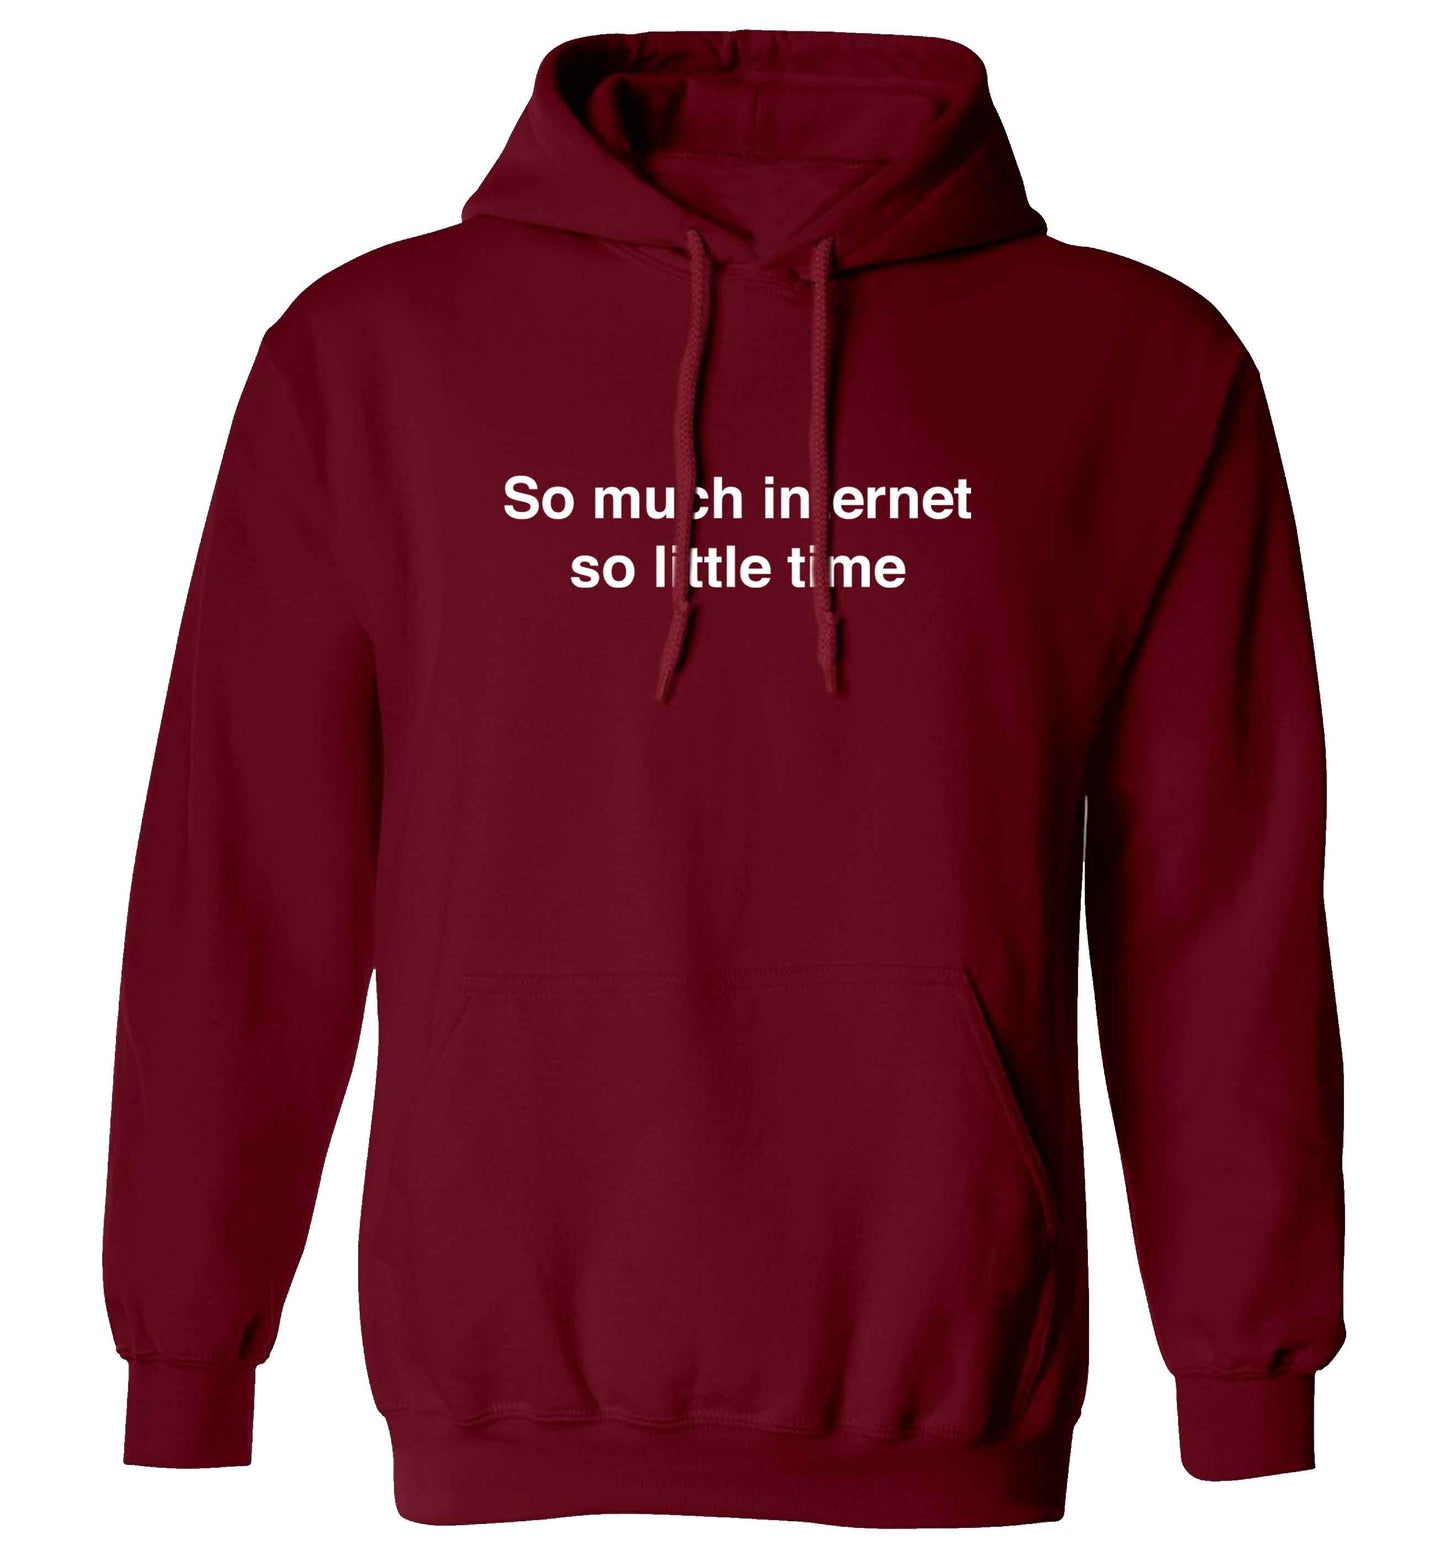 So much internet so little time adults unisex maroon hoodie 2XL